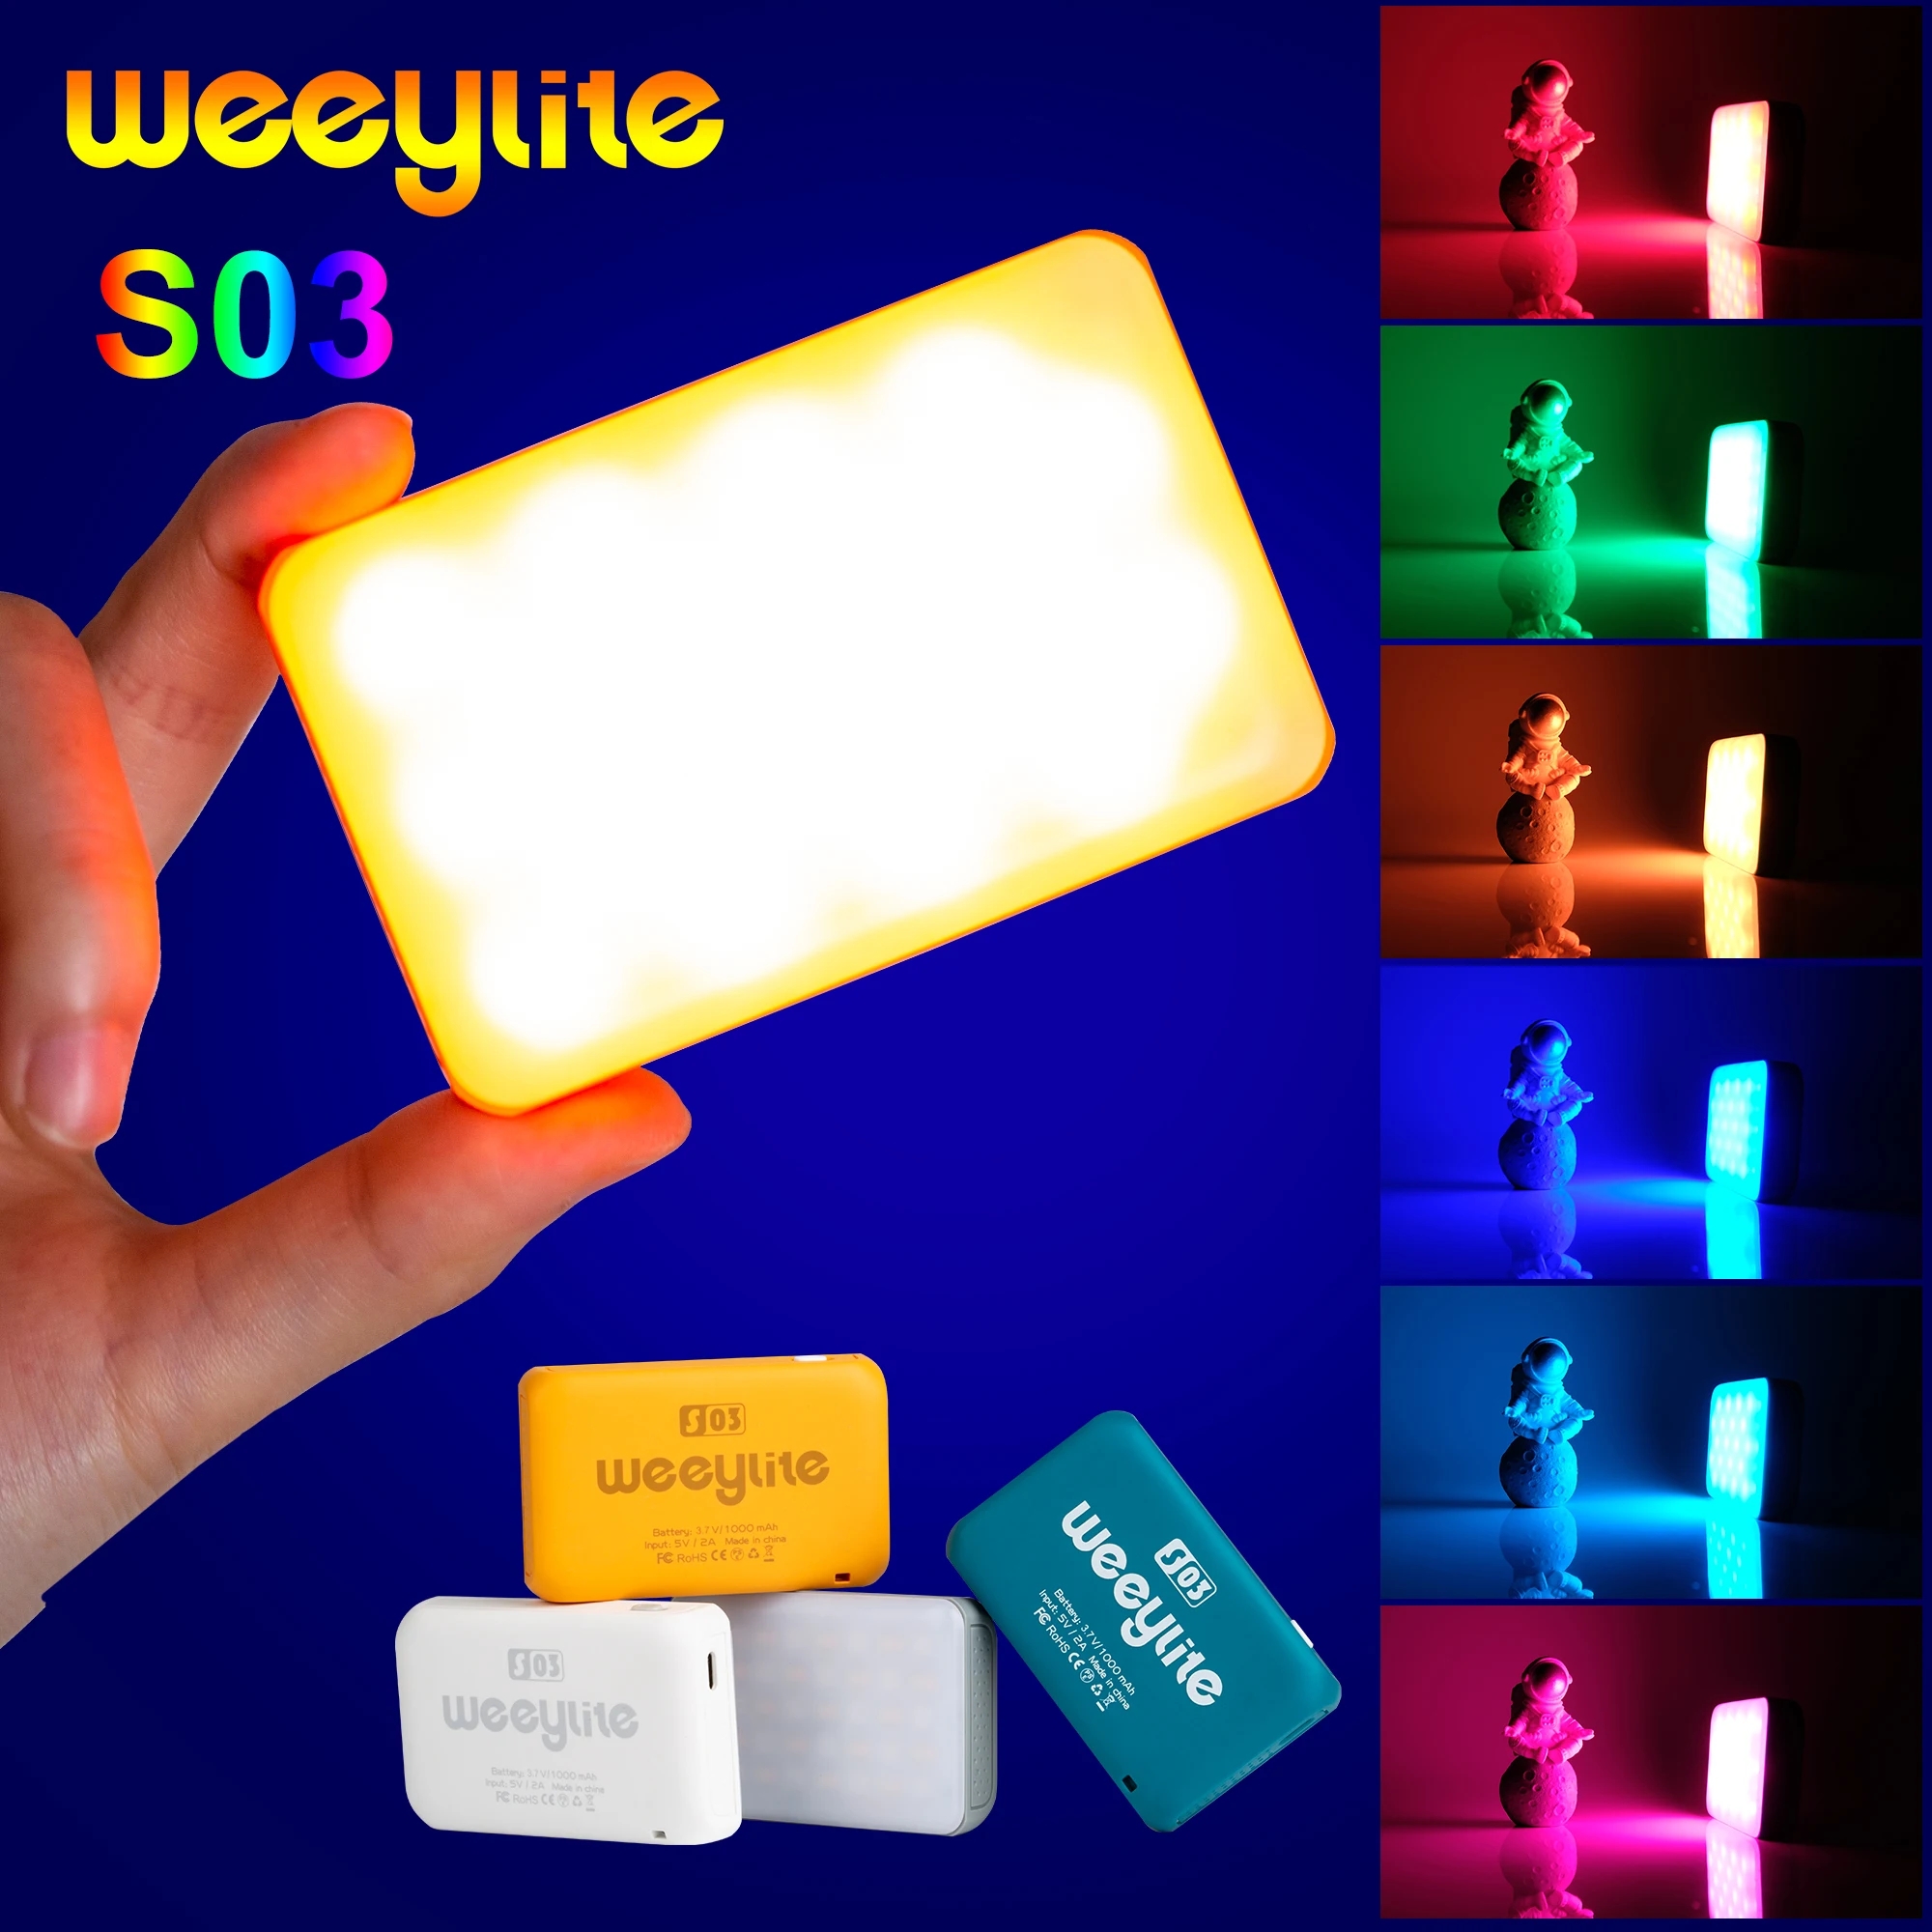 

Weeylite S03 LED Video Light RGB Color Fill Light Mini Portable Pocket Photography Camera APP Control Dimmable Live Vlog Lamp